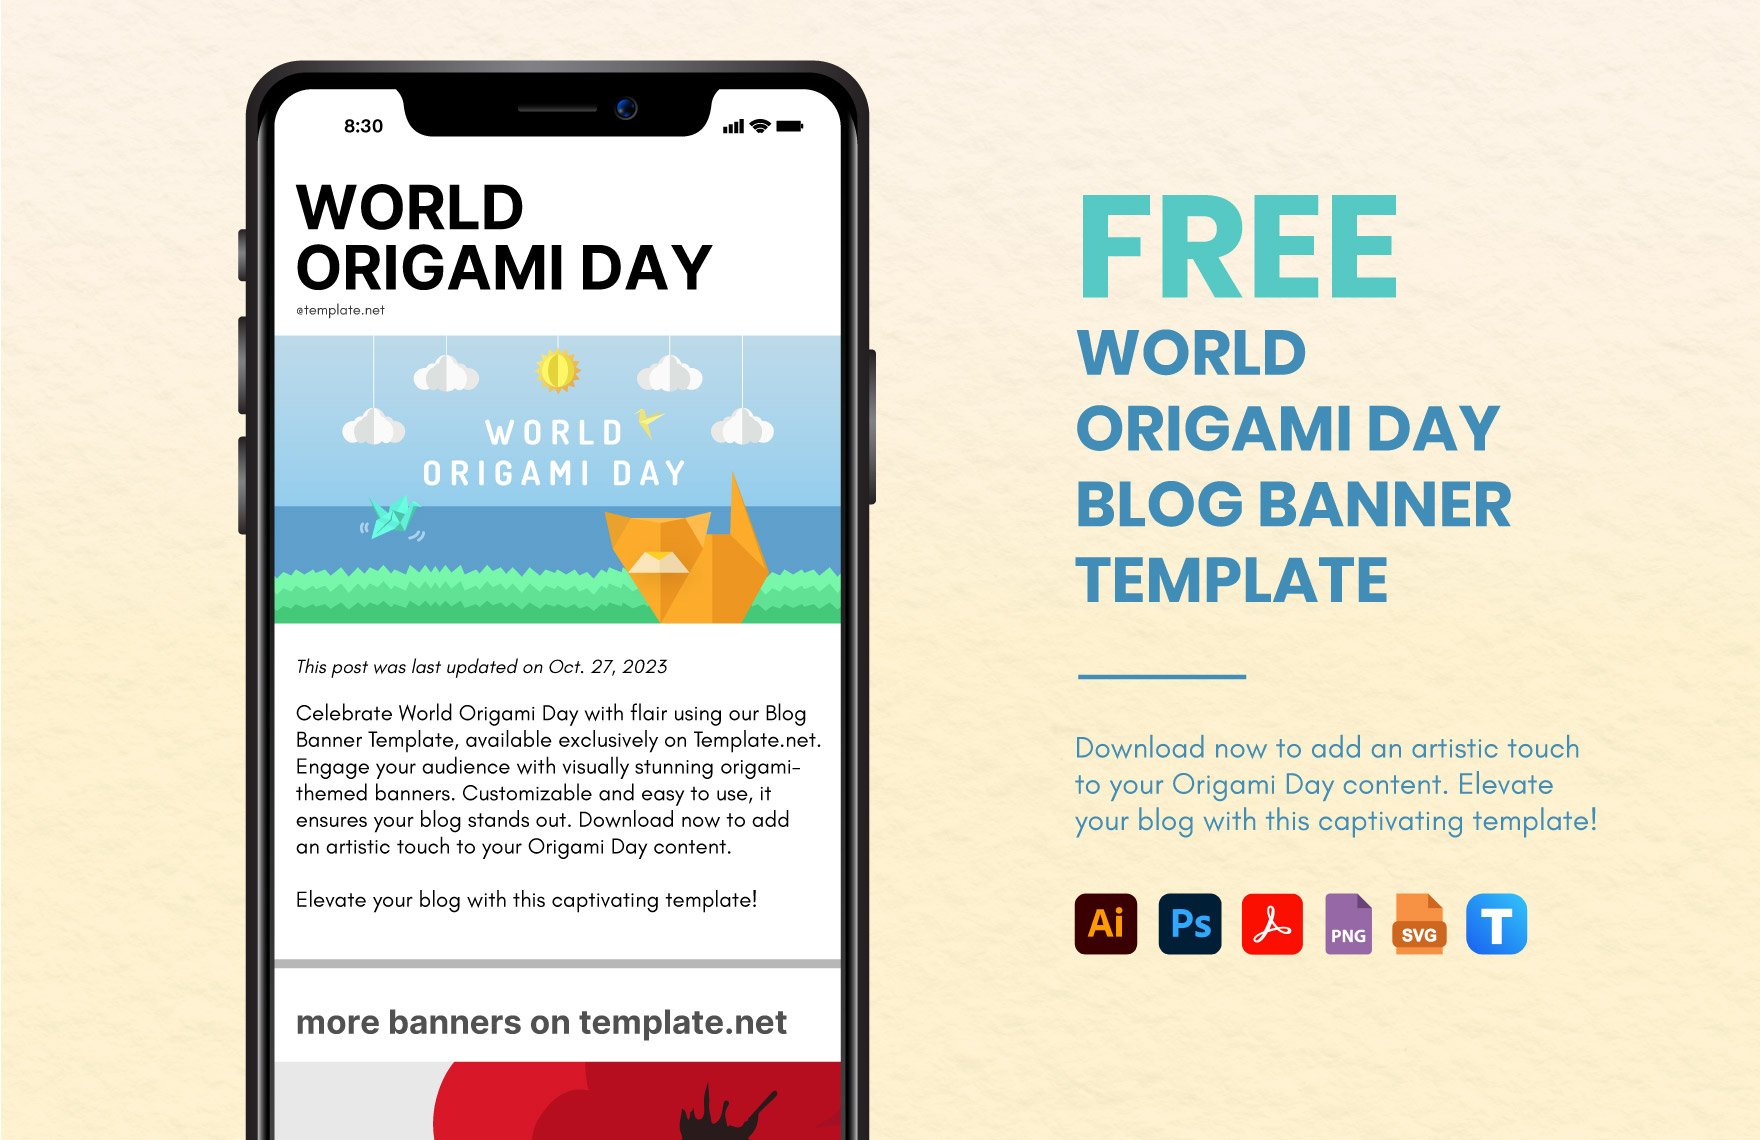 Free World Origami Day Blog Banner Template in PDF, Illustrator, PSD, SVG, PNG